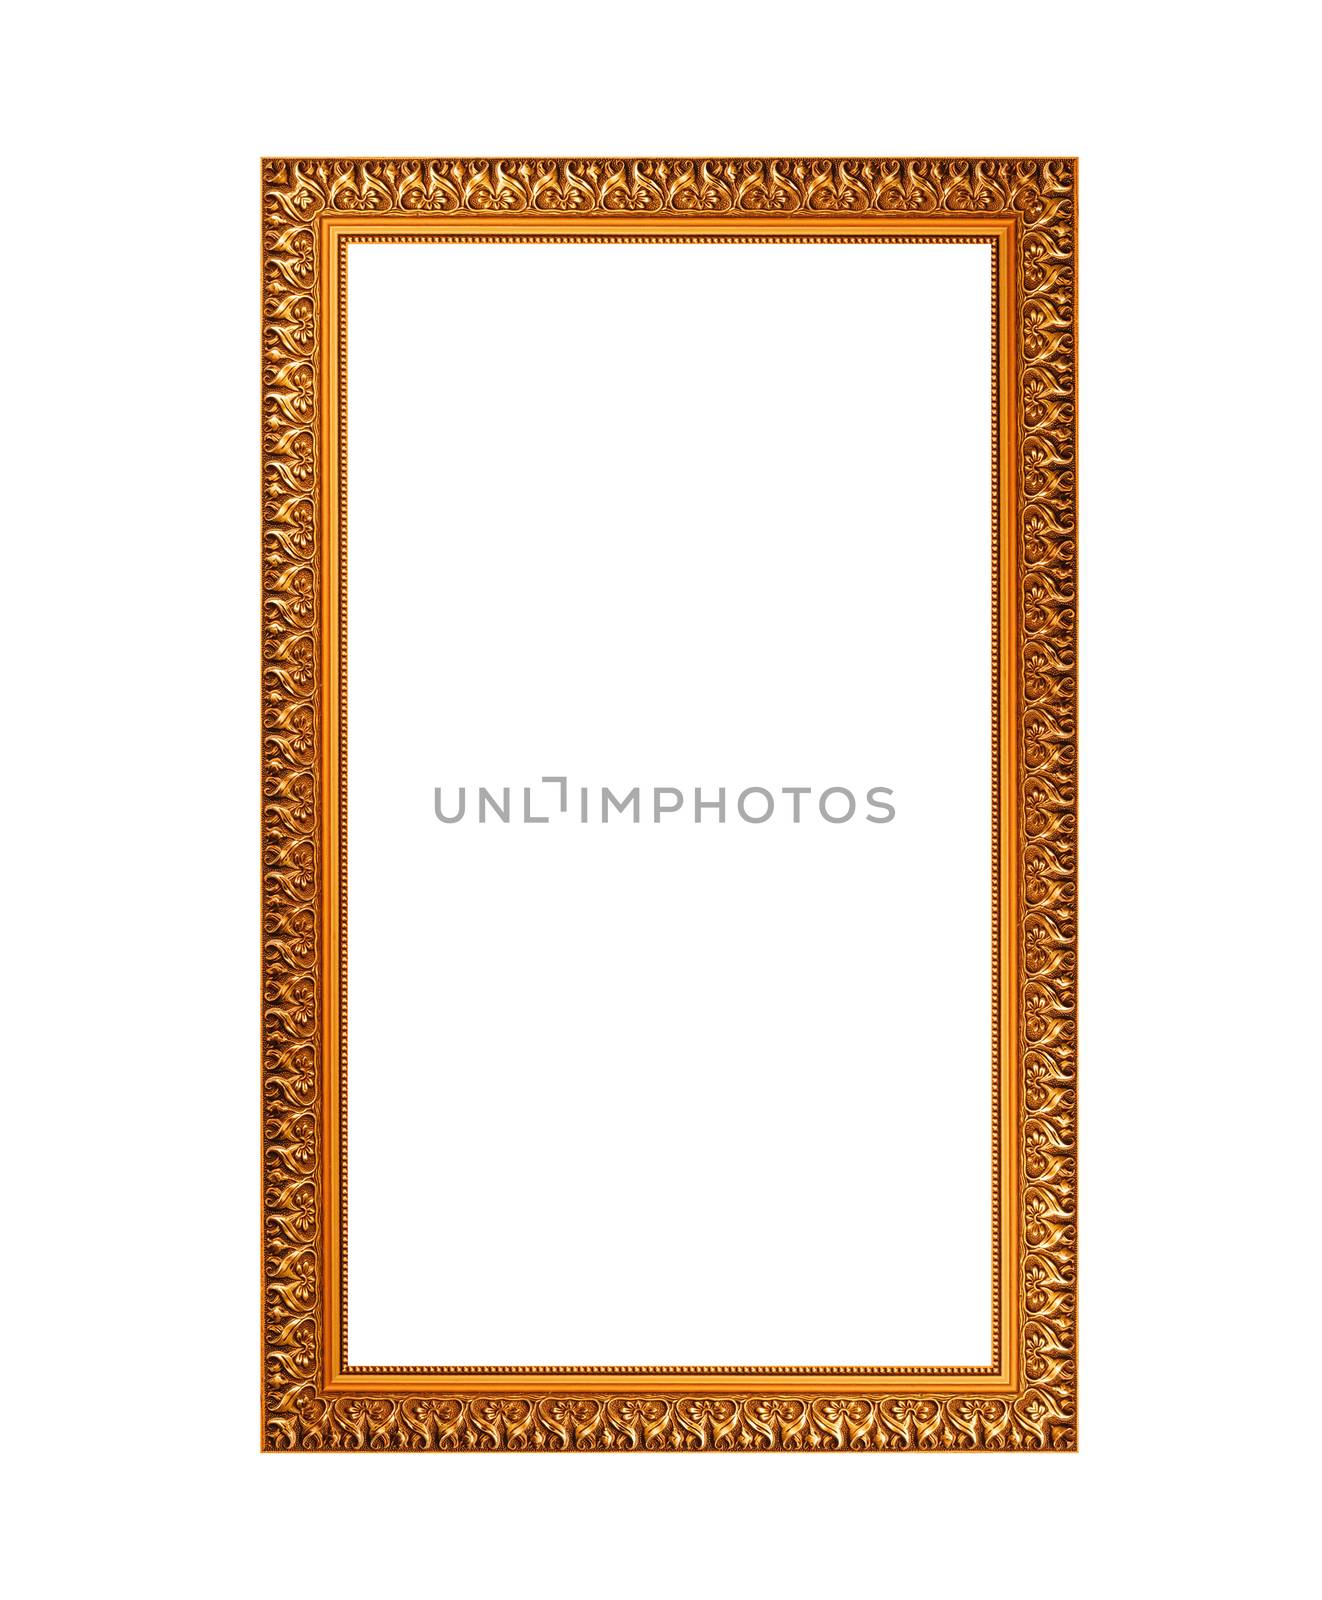 gilded wooden frame isolated on white background by timonko